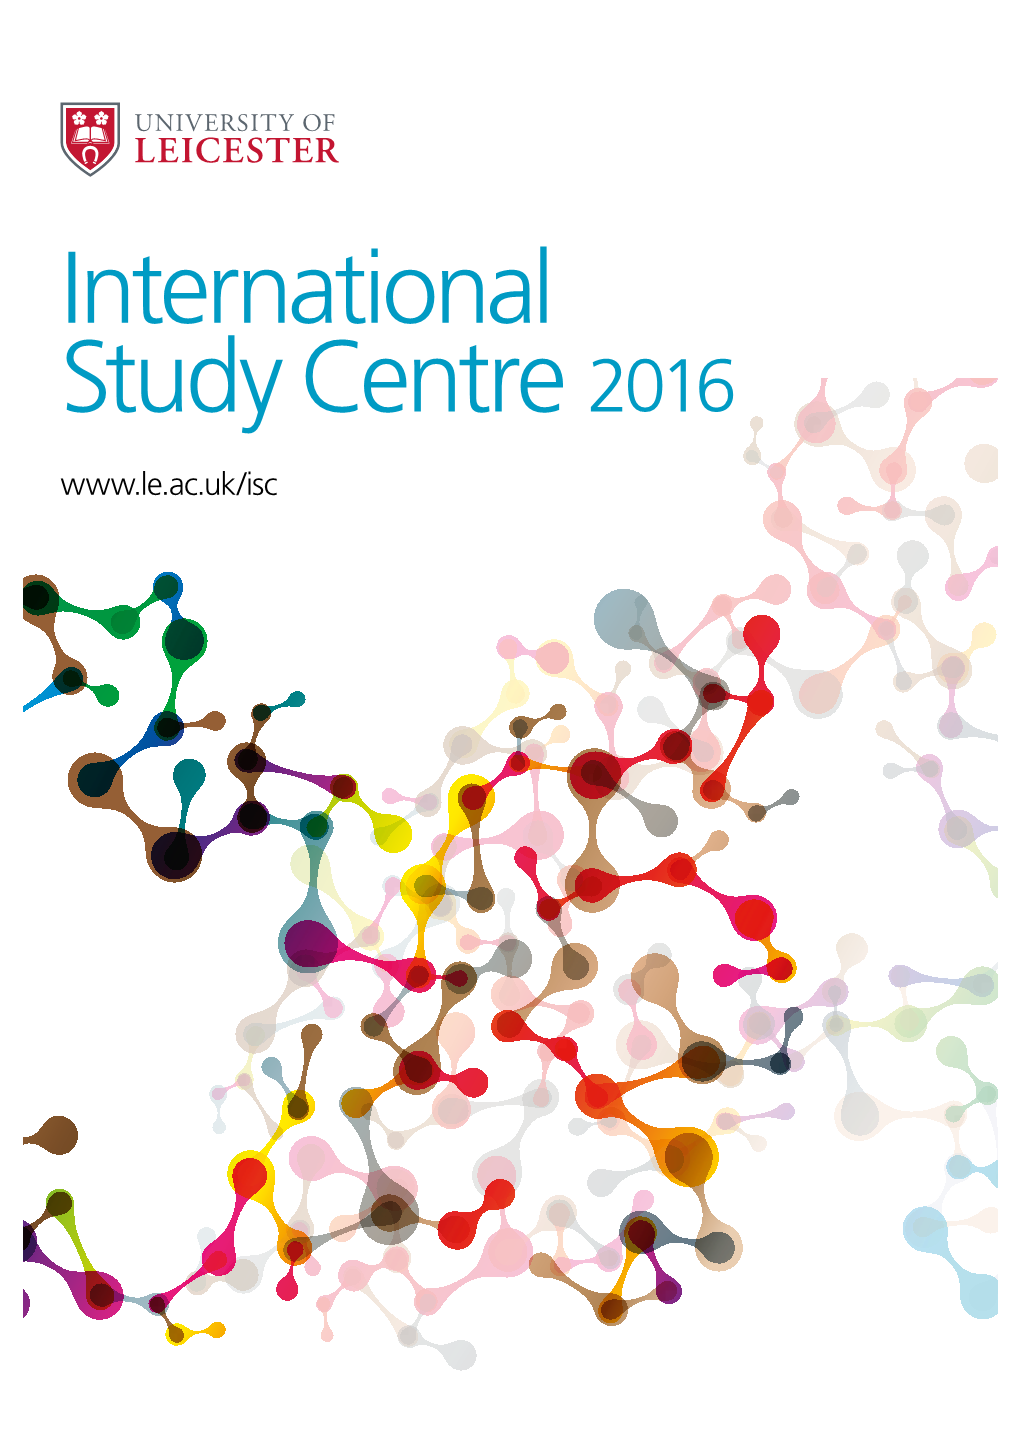 International Study Centre 2016 Welcome Leicester Is a Leading UK University Committed to International Excellence